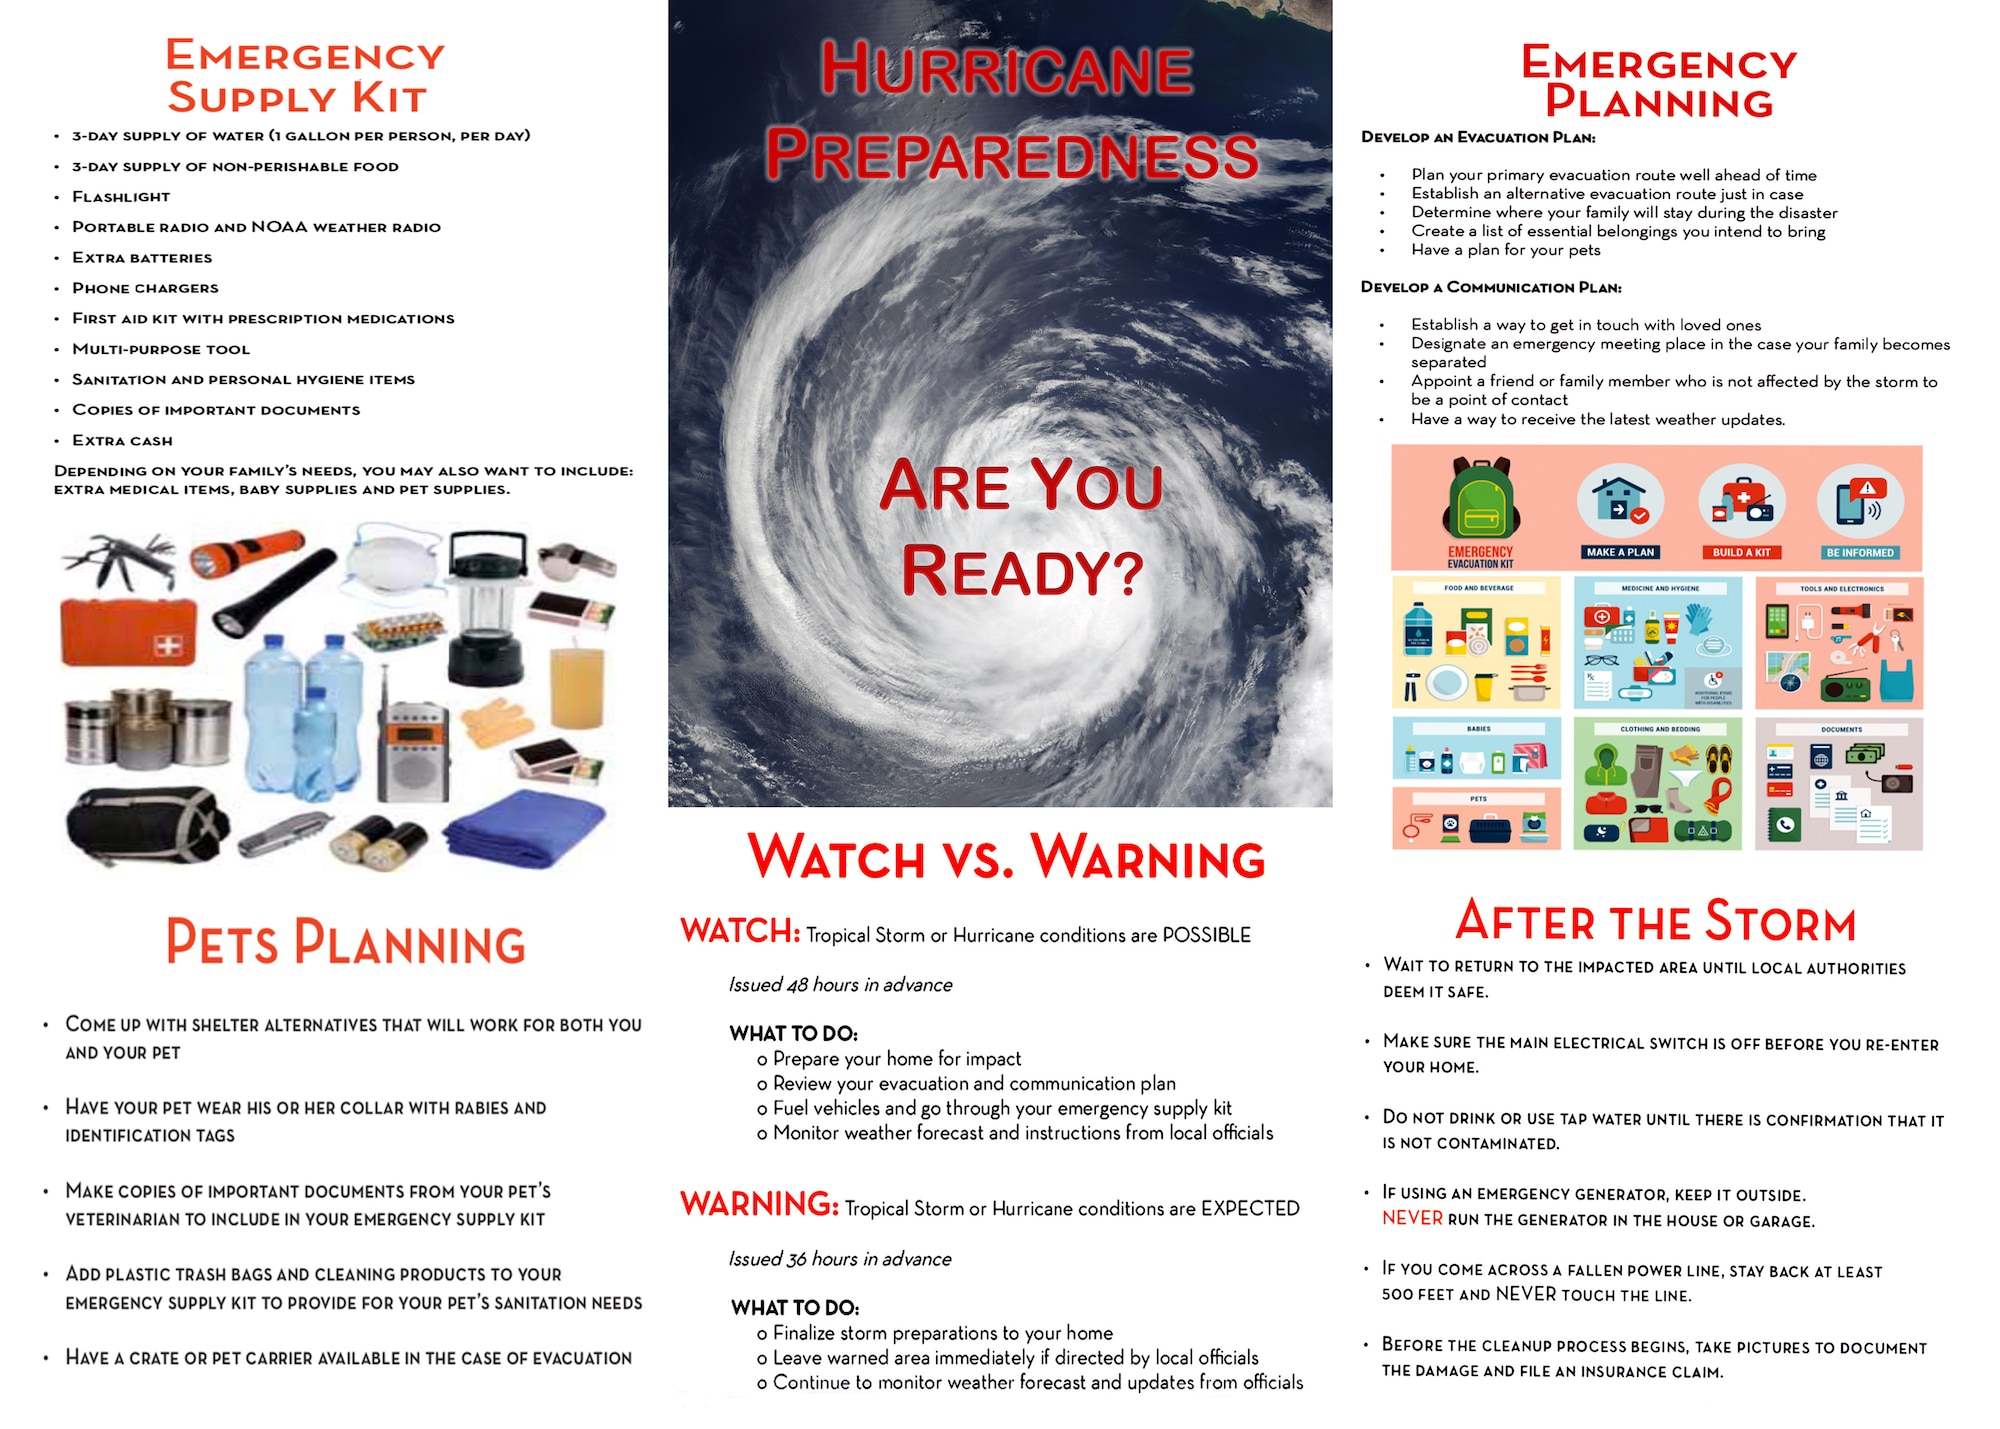 Hurricane Preparedness graphic with information about hurricane preparations and planning. (U.S. Air Force Graphic by Jessica L. Kendziorek)